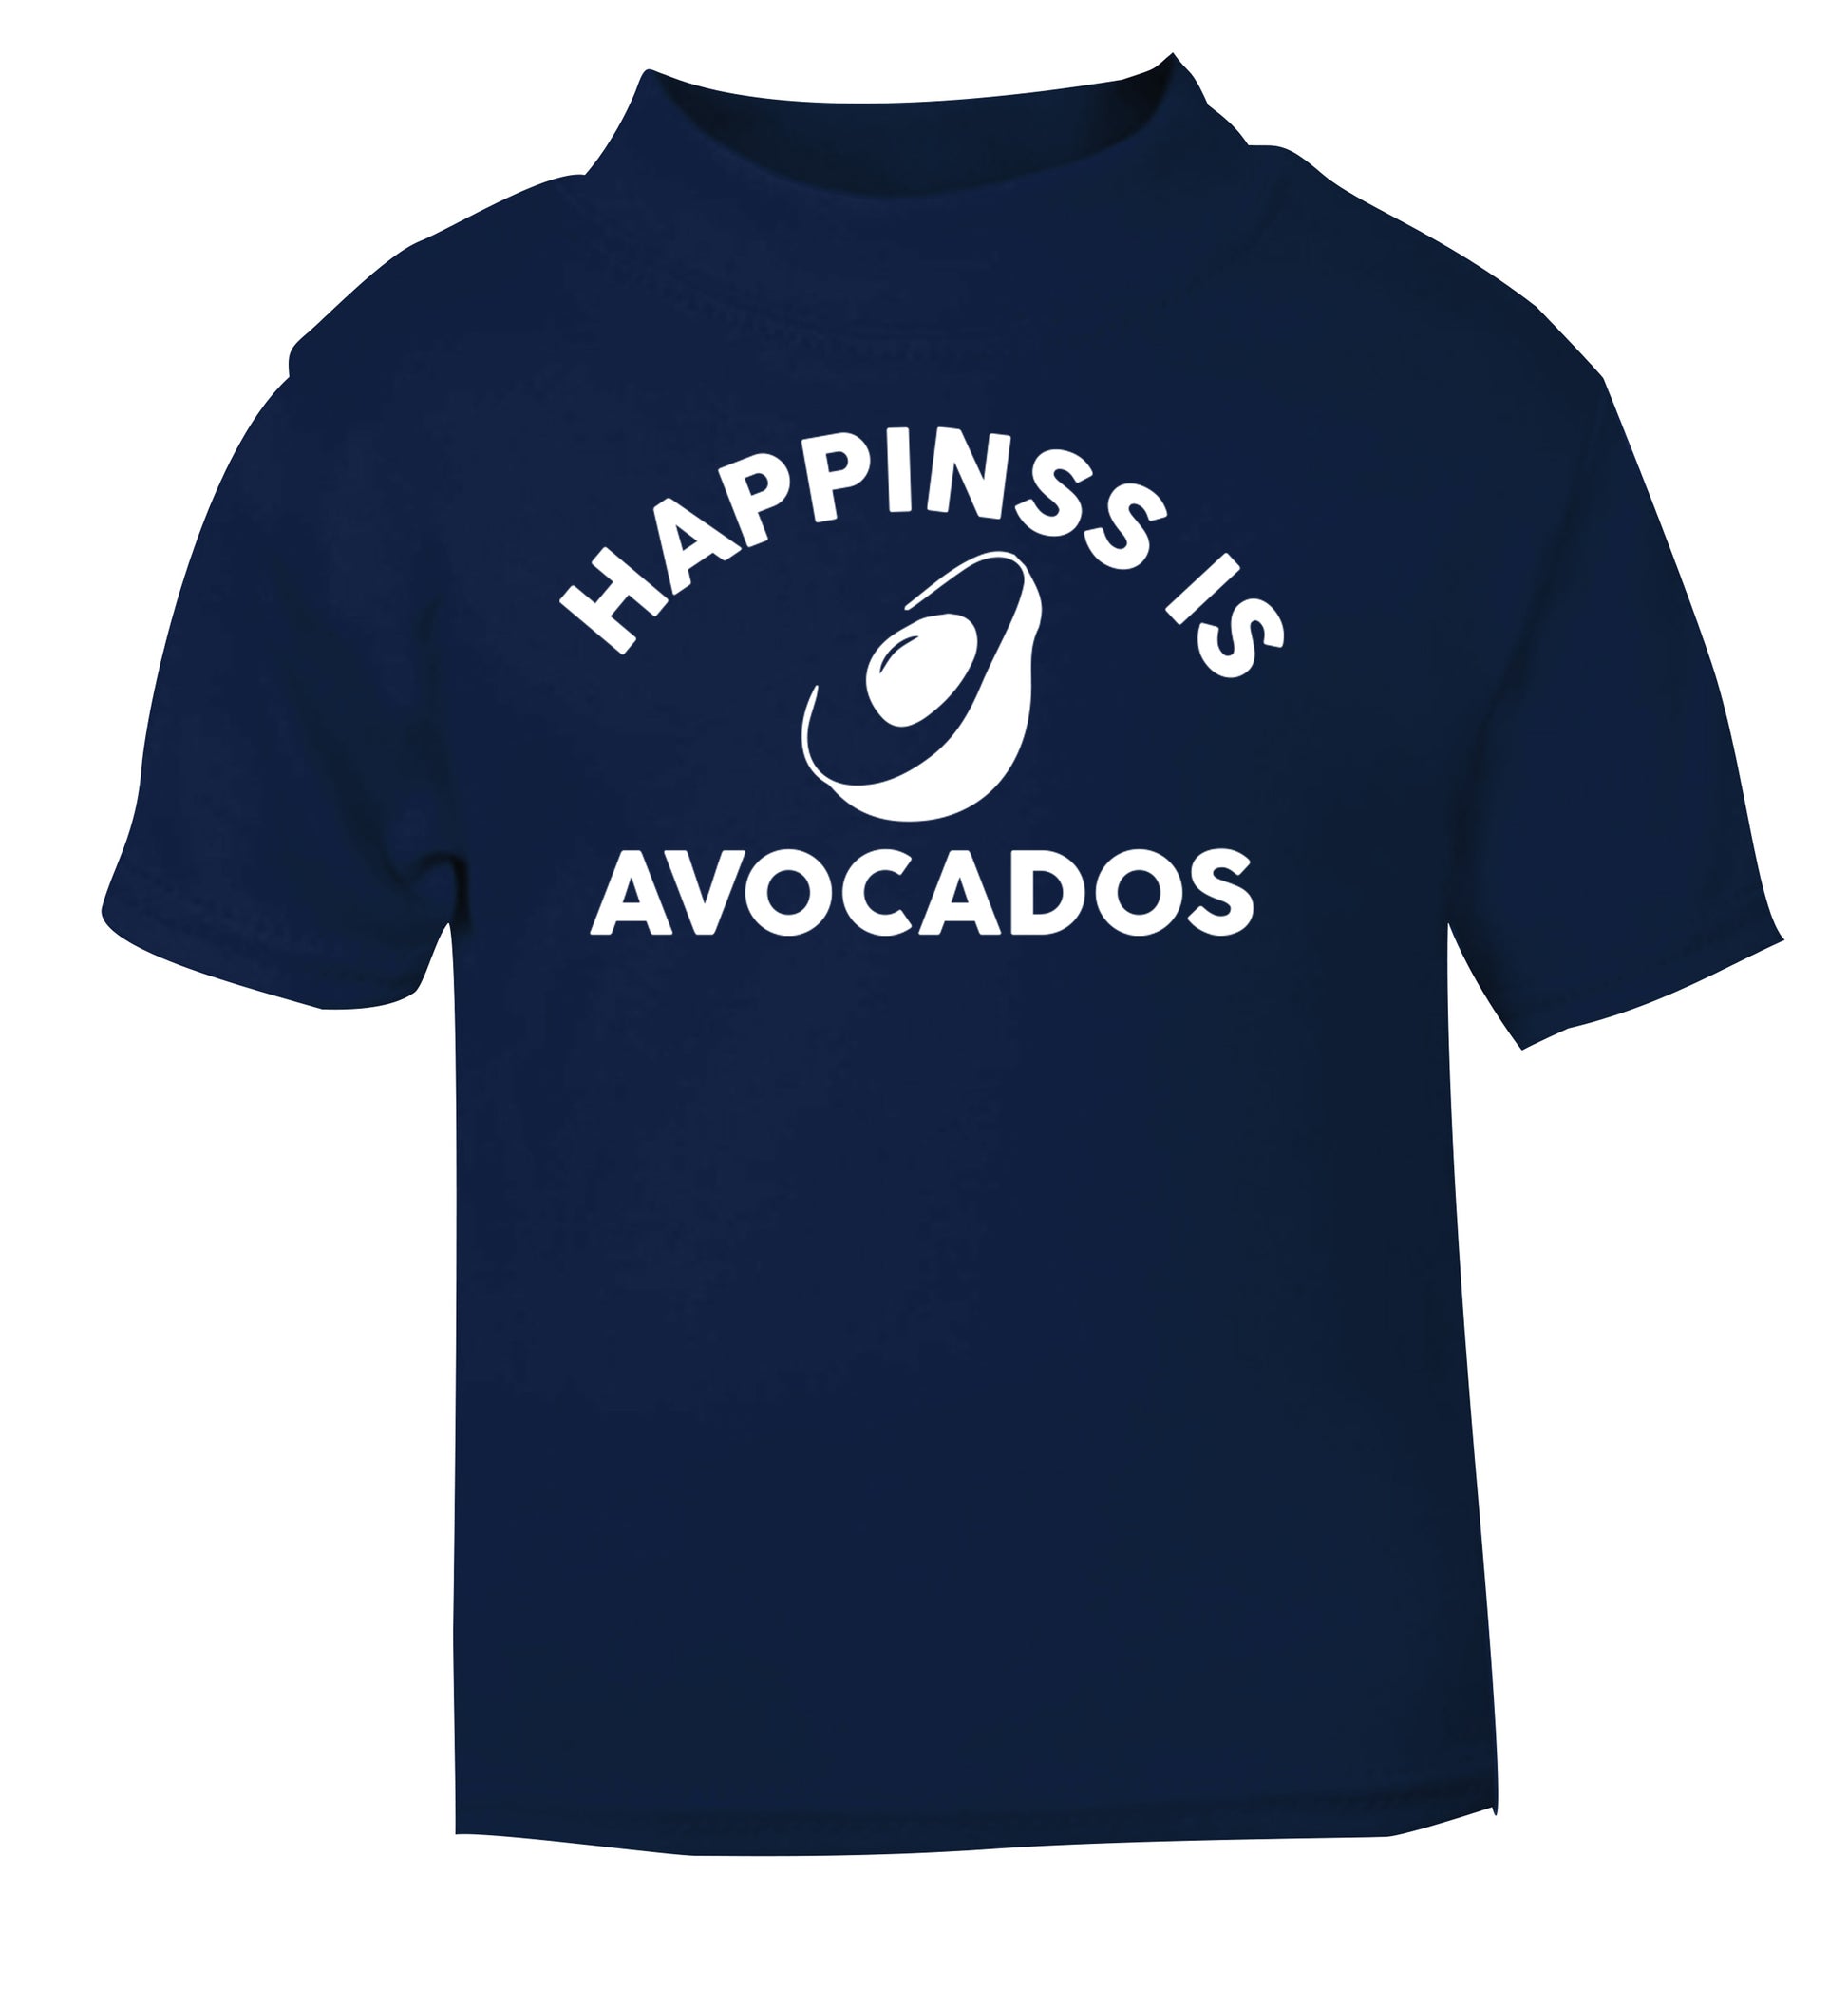 Happiness is avocados navy Baby Toddler Tshirt 2 Years